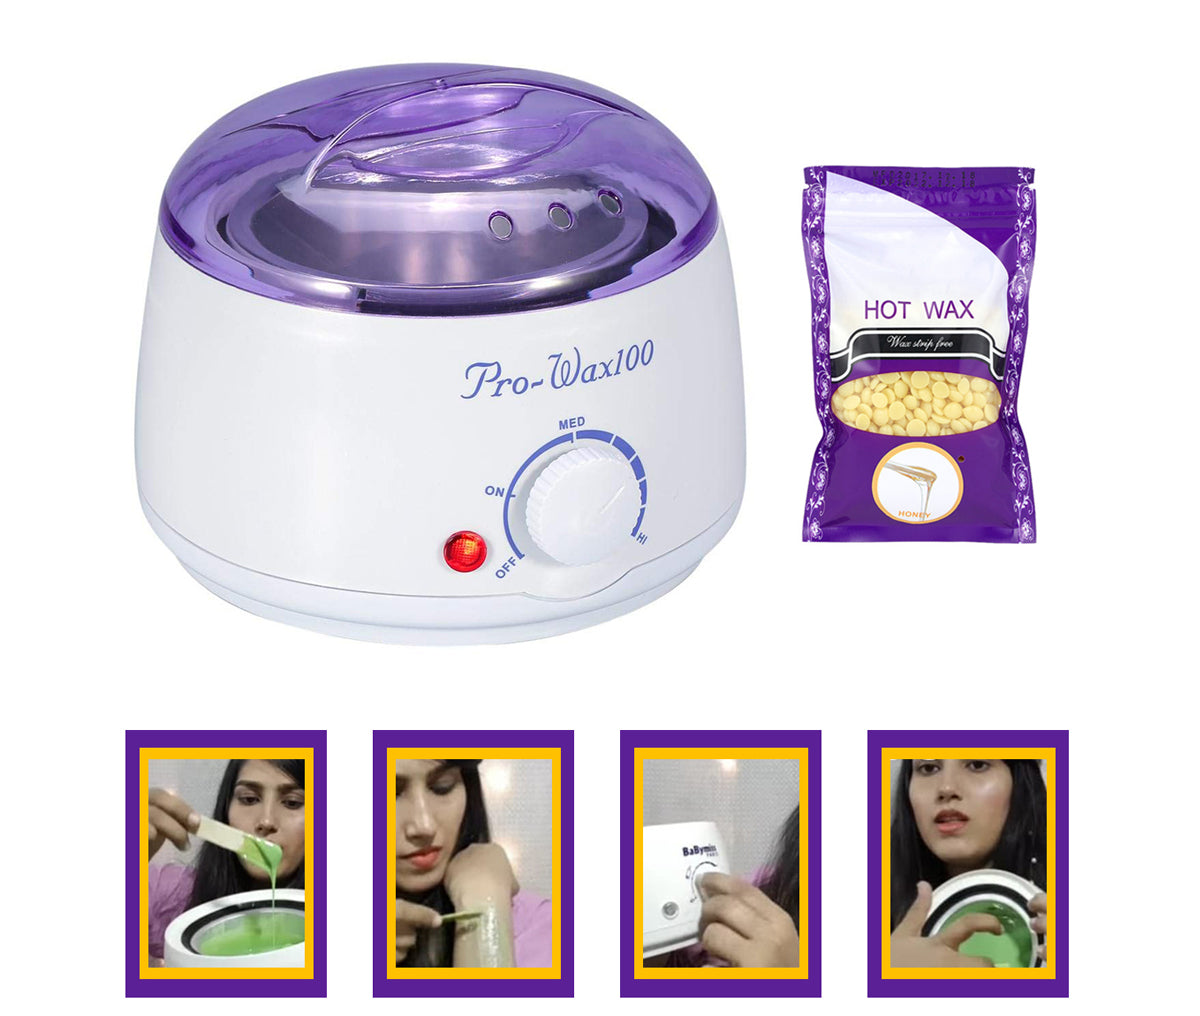 Professional Wax Heater - The Perfect Way to Get Smooth and Long-Lasting Waxing Results